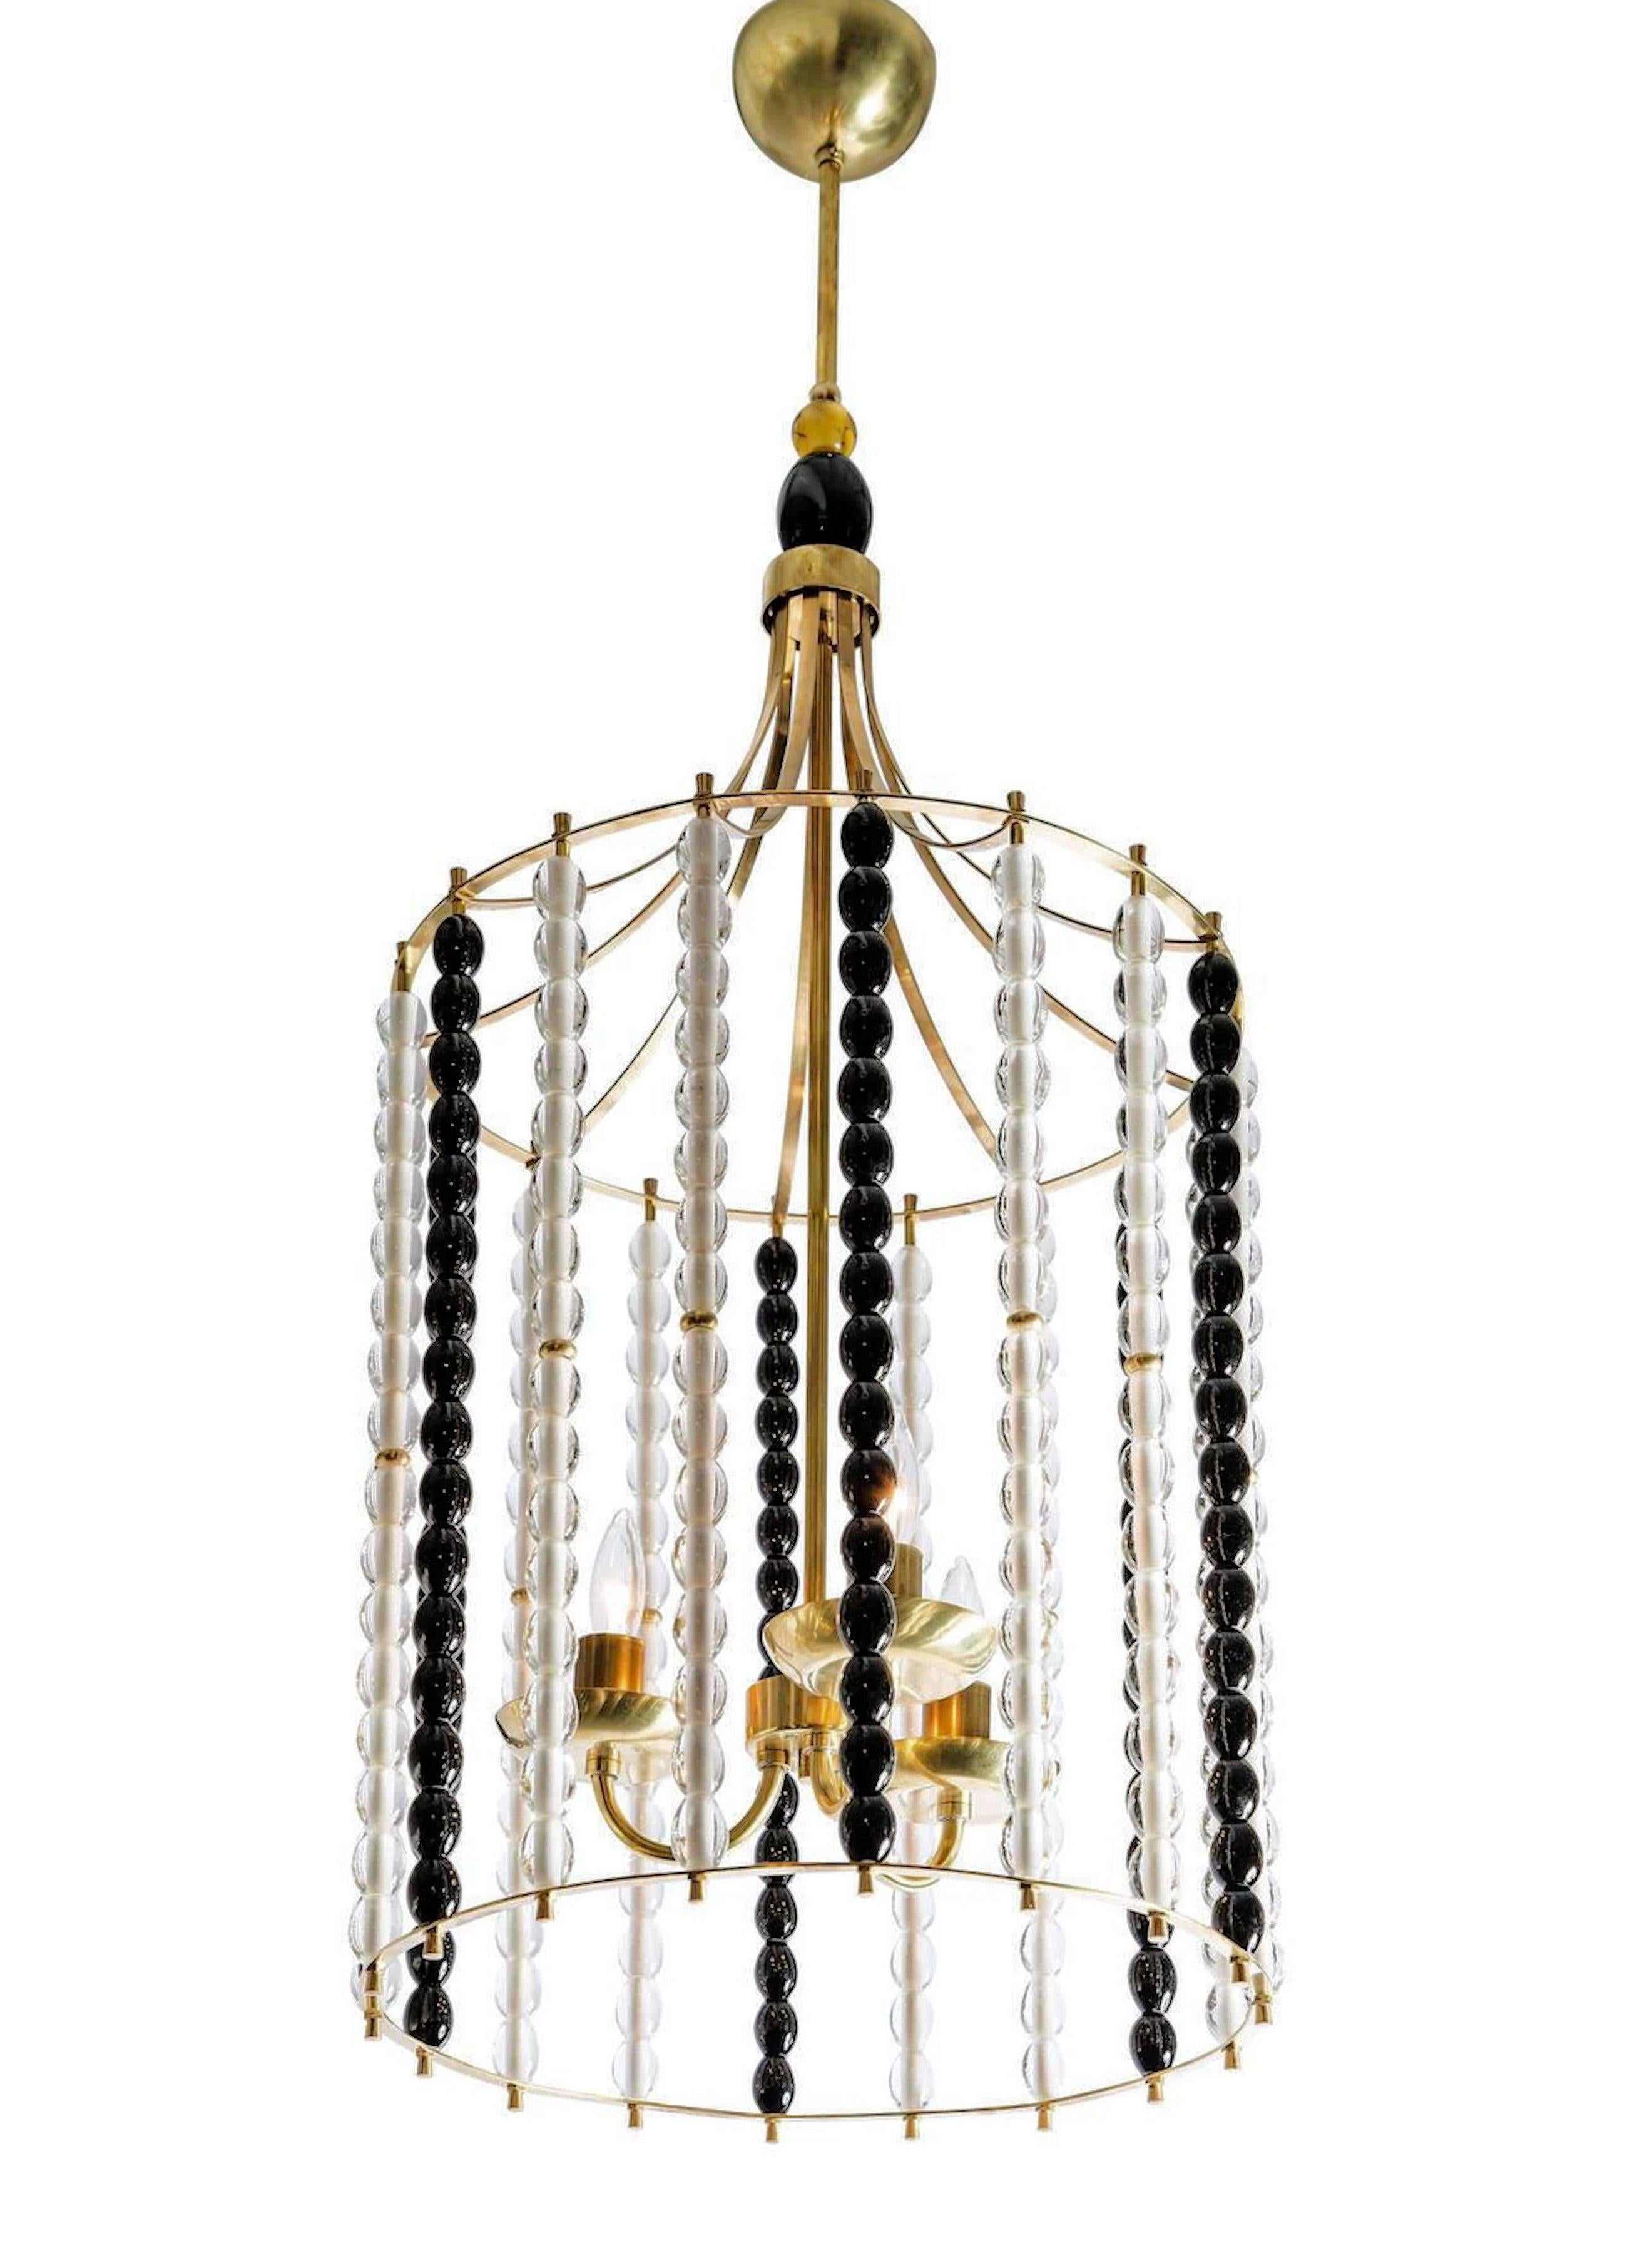 Pair of Mid-Century Murano bird cage lantern chandeliers with stacked black and clear Murano glass beads. Attributed to A. Barbini, circa 1960. Also available individually.